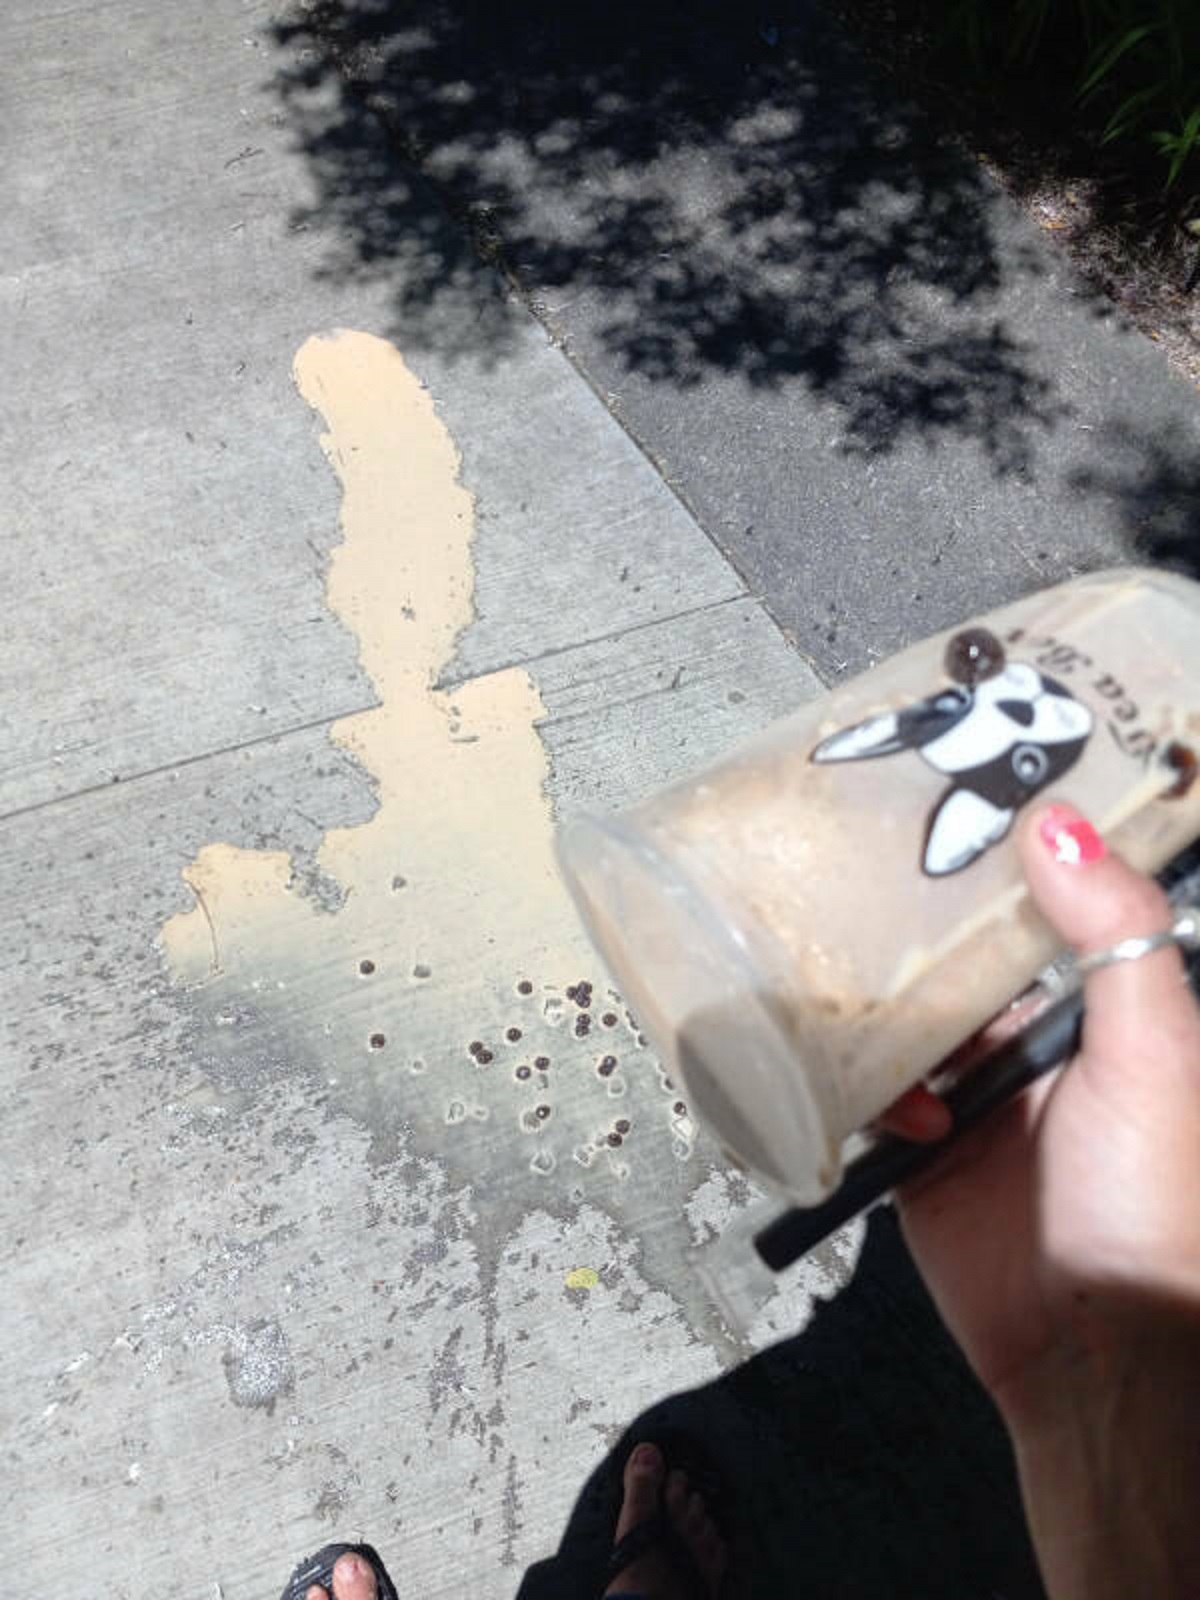 “Decided to treat myself to some boba for the first time in months. Tripped and fell before i even put in the straw.”